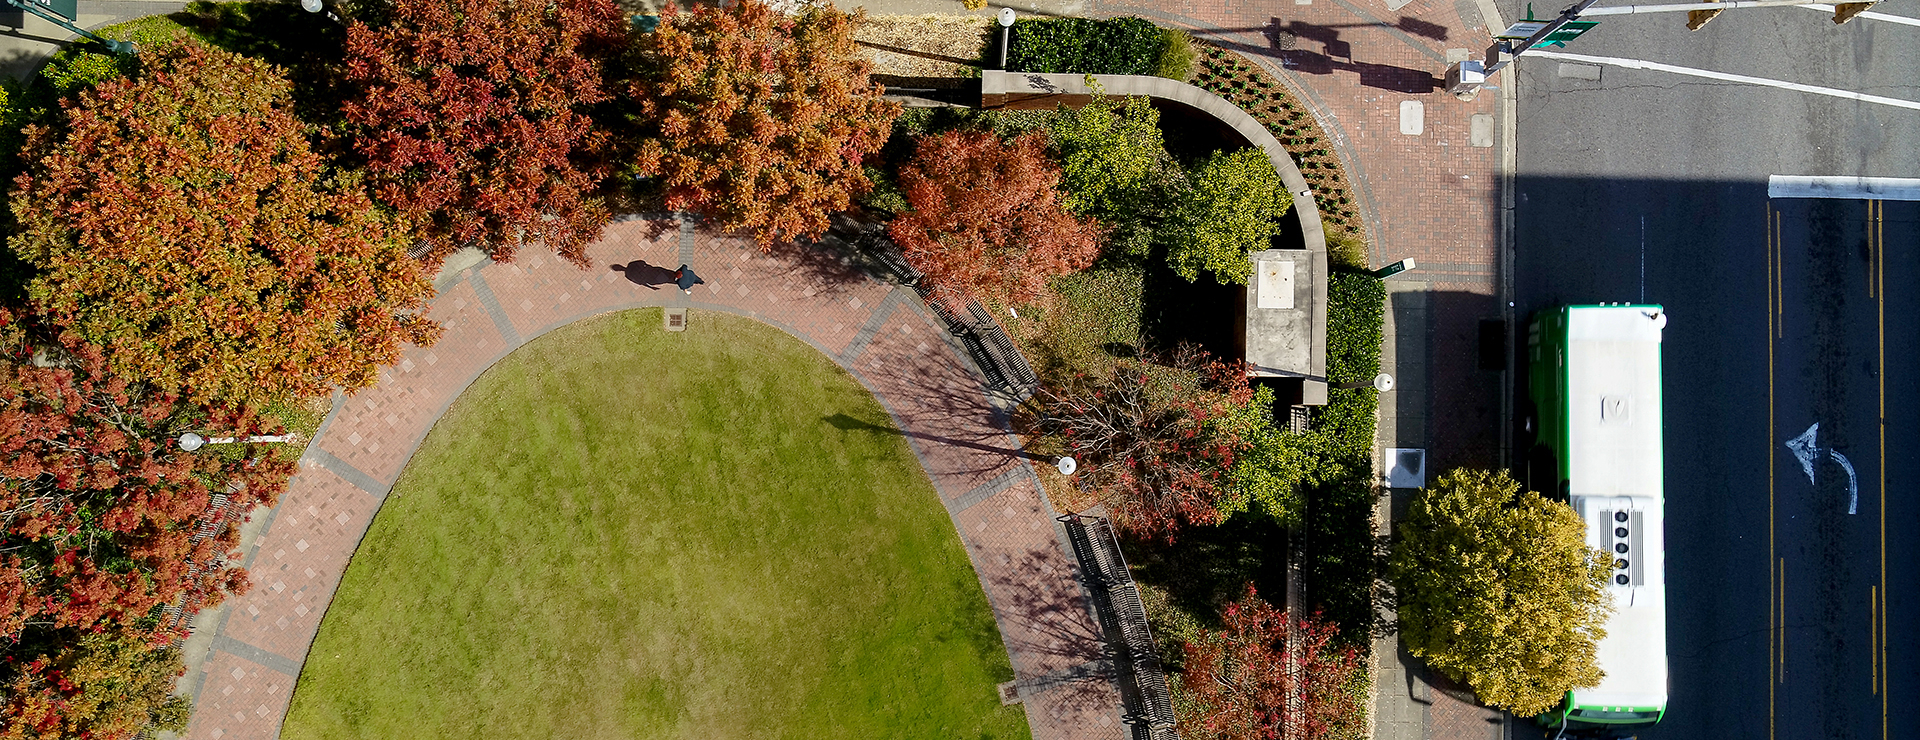 Operating drones on campus